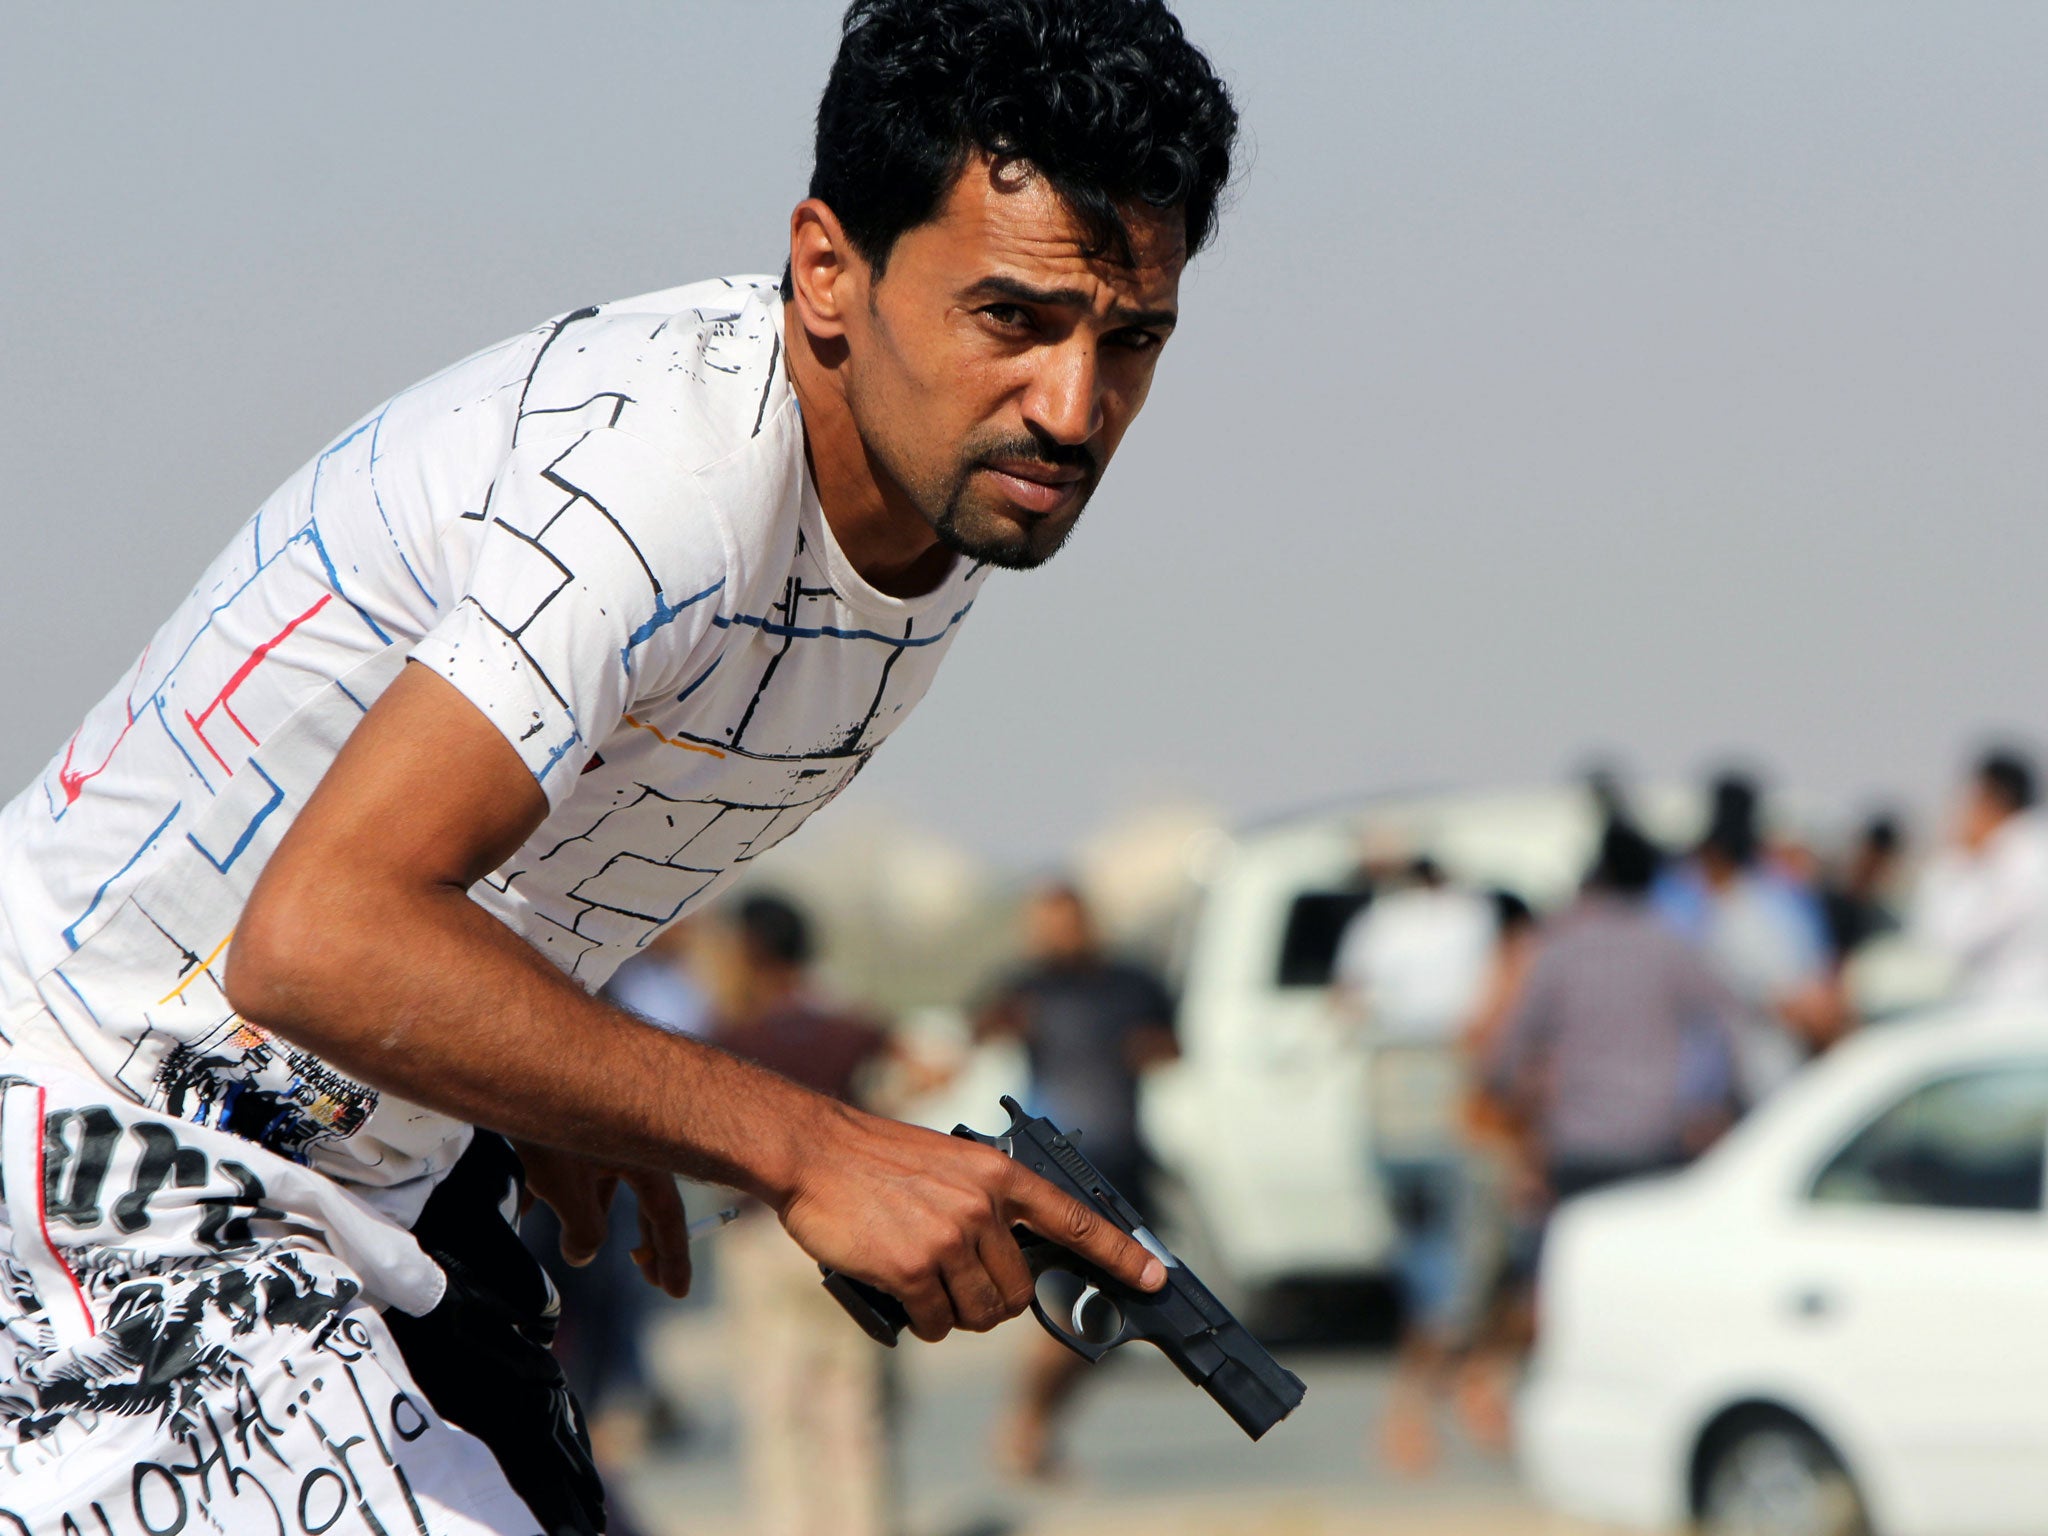 A Libyan protester holds a gun during clashes with troops in Benghazi